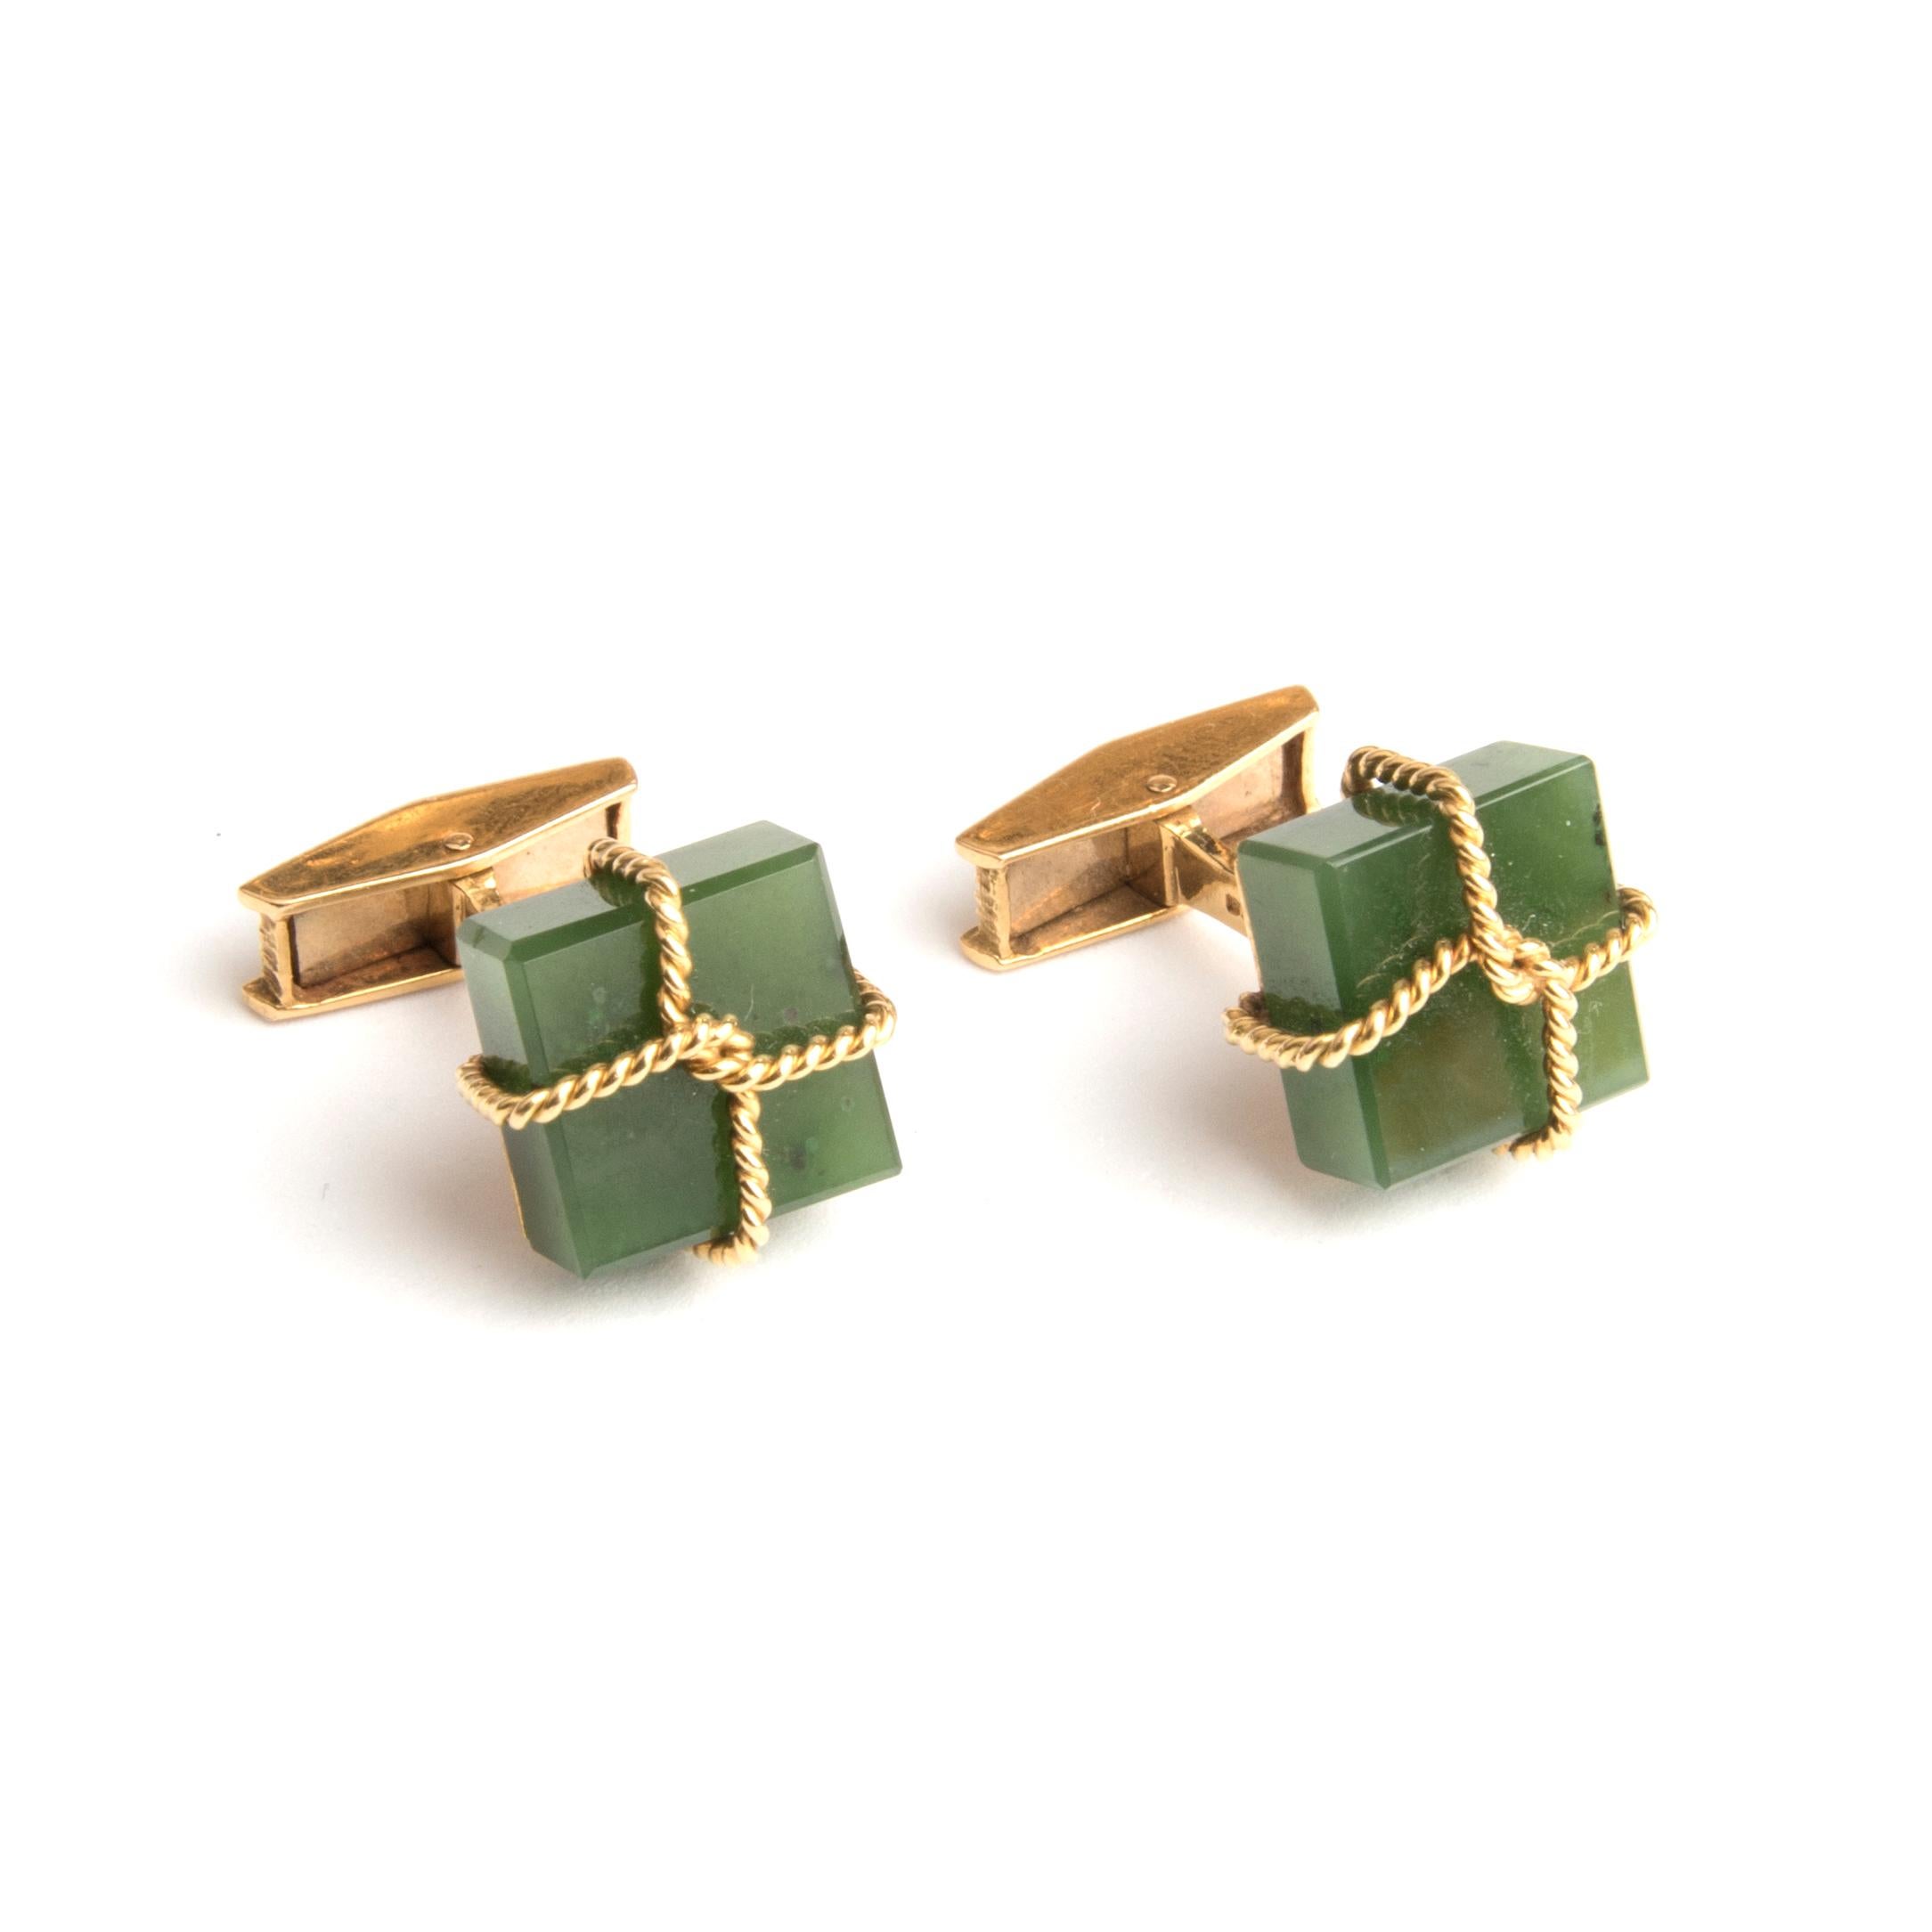 Pair of cufflinks by Alan Gard designed as packages, the square pieces of jade held by 18k Yellow Gold robe motive strings.
With the makers mark AMG for Alan Martin Gard and English hallmarks
Circa 1970